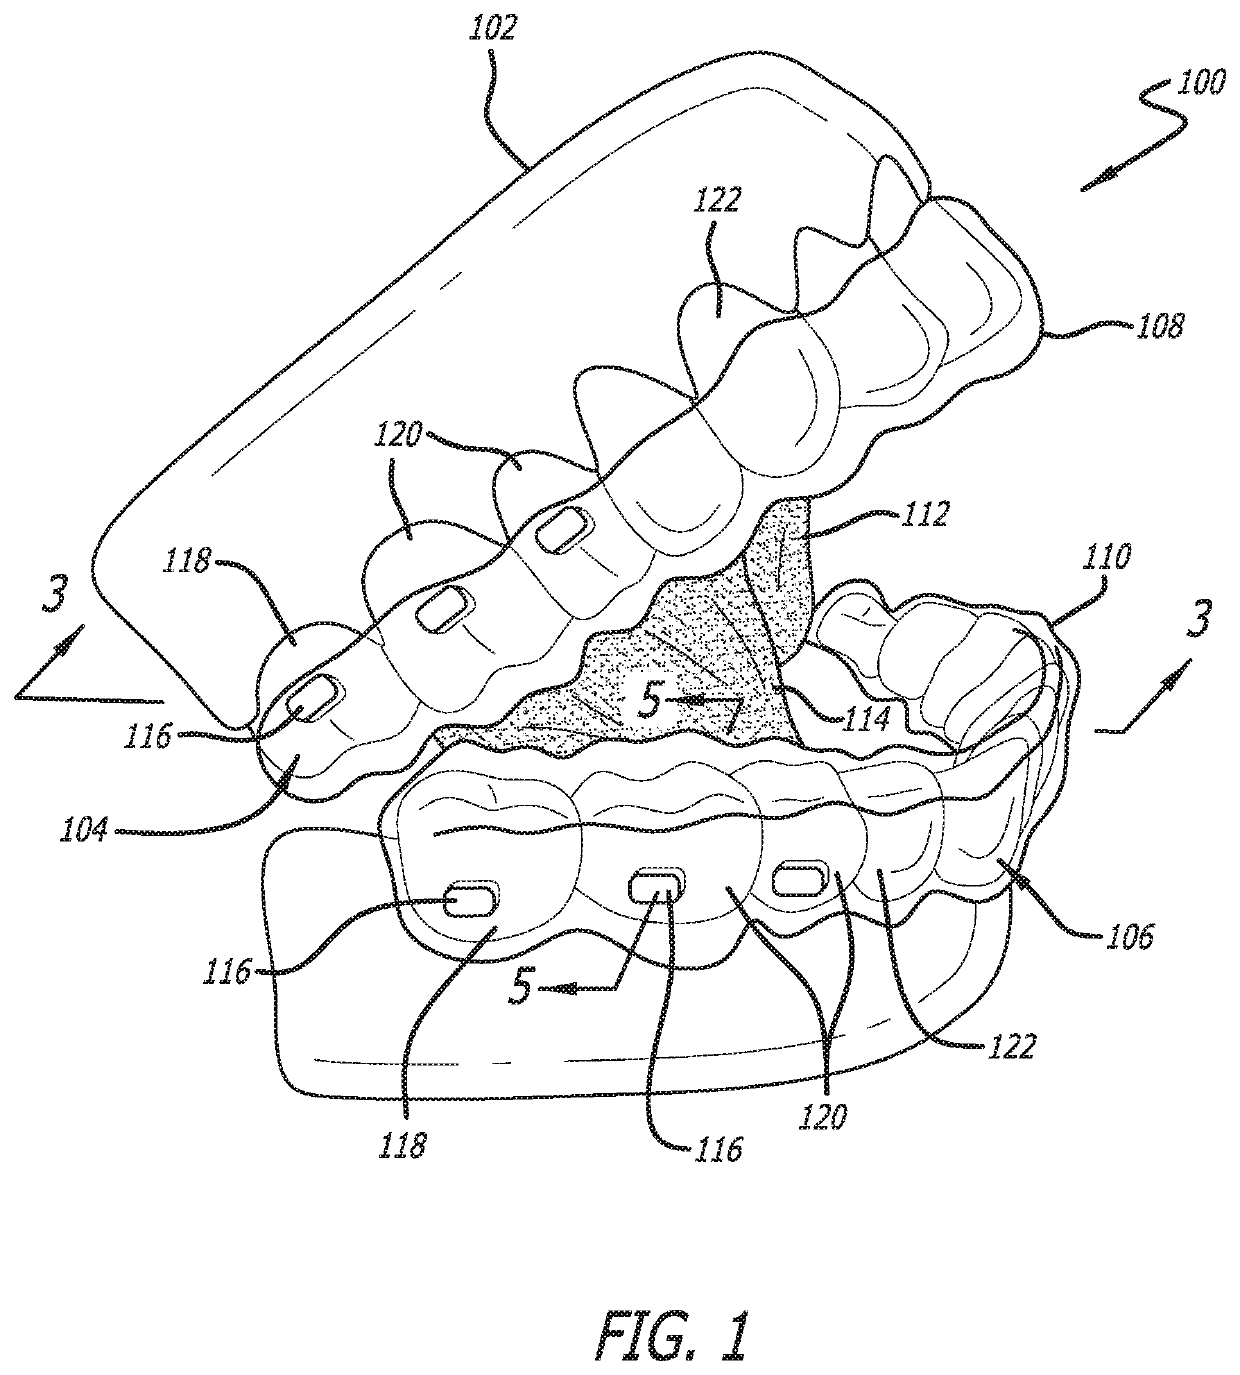 Oral weight control device